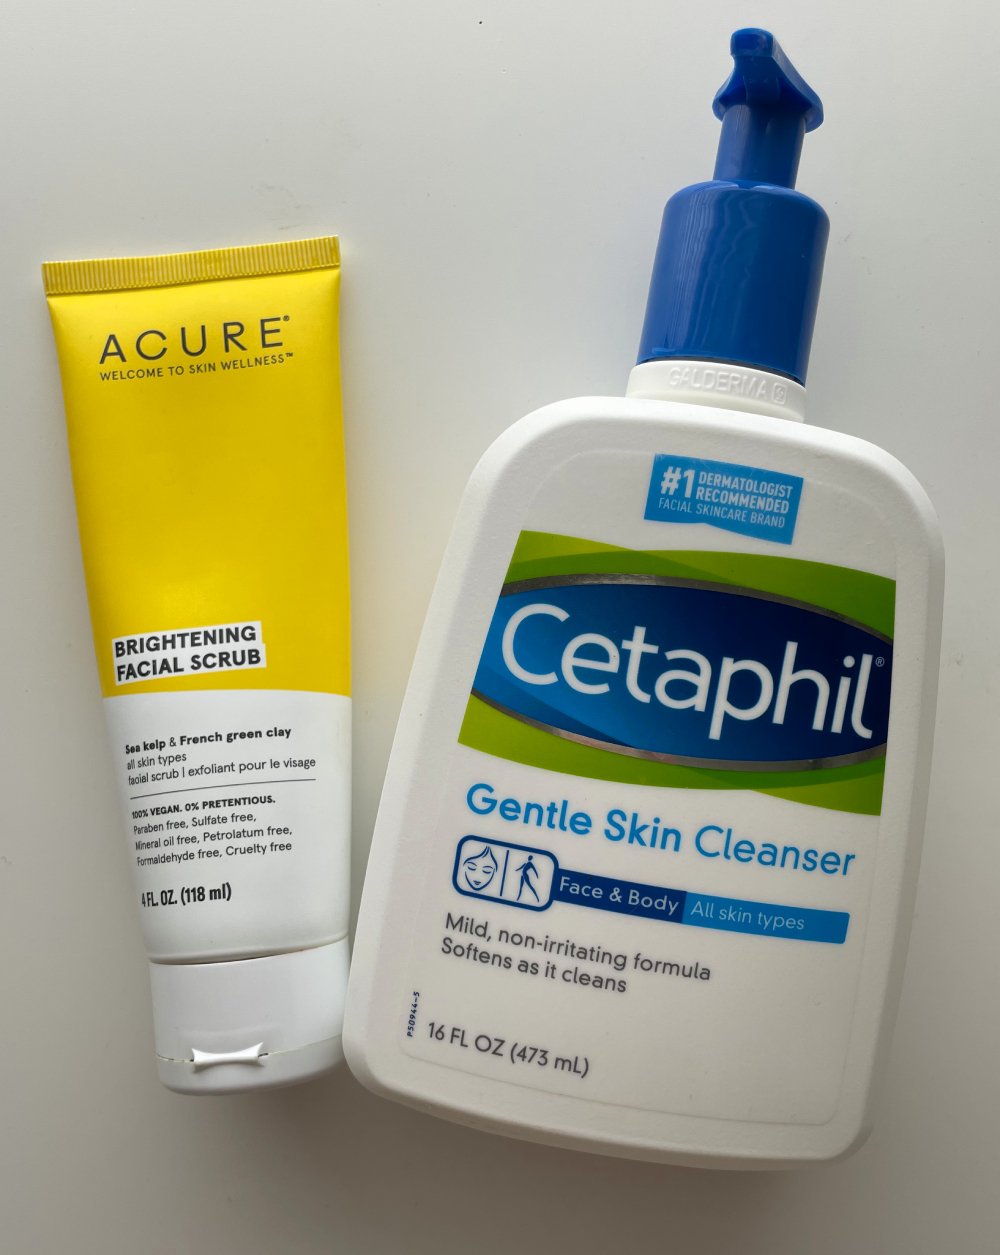 cetaphil gentle skin cleanser and Acure brightening facial scrub